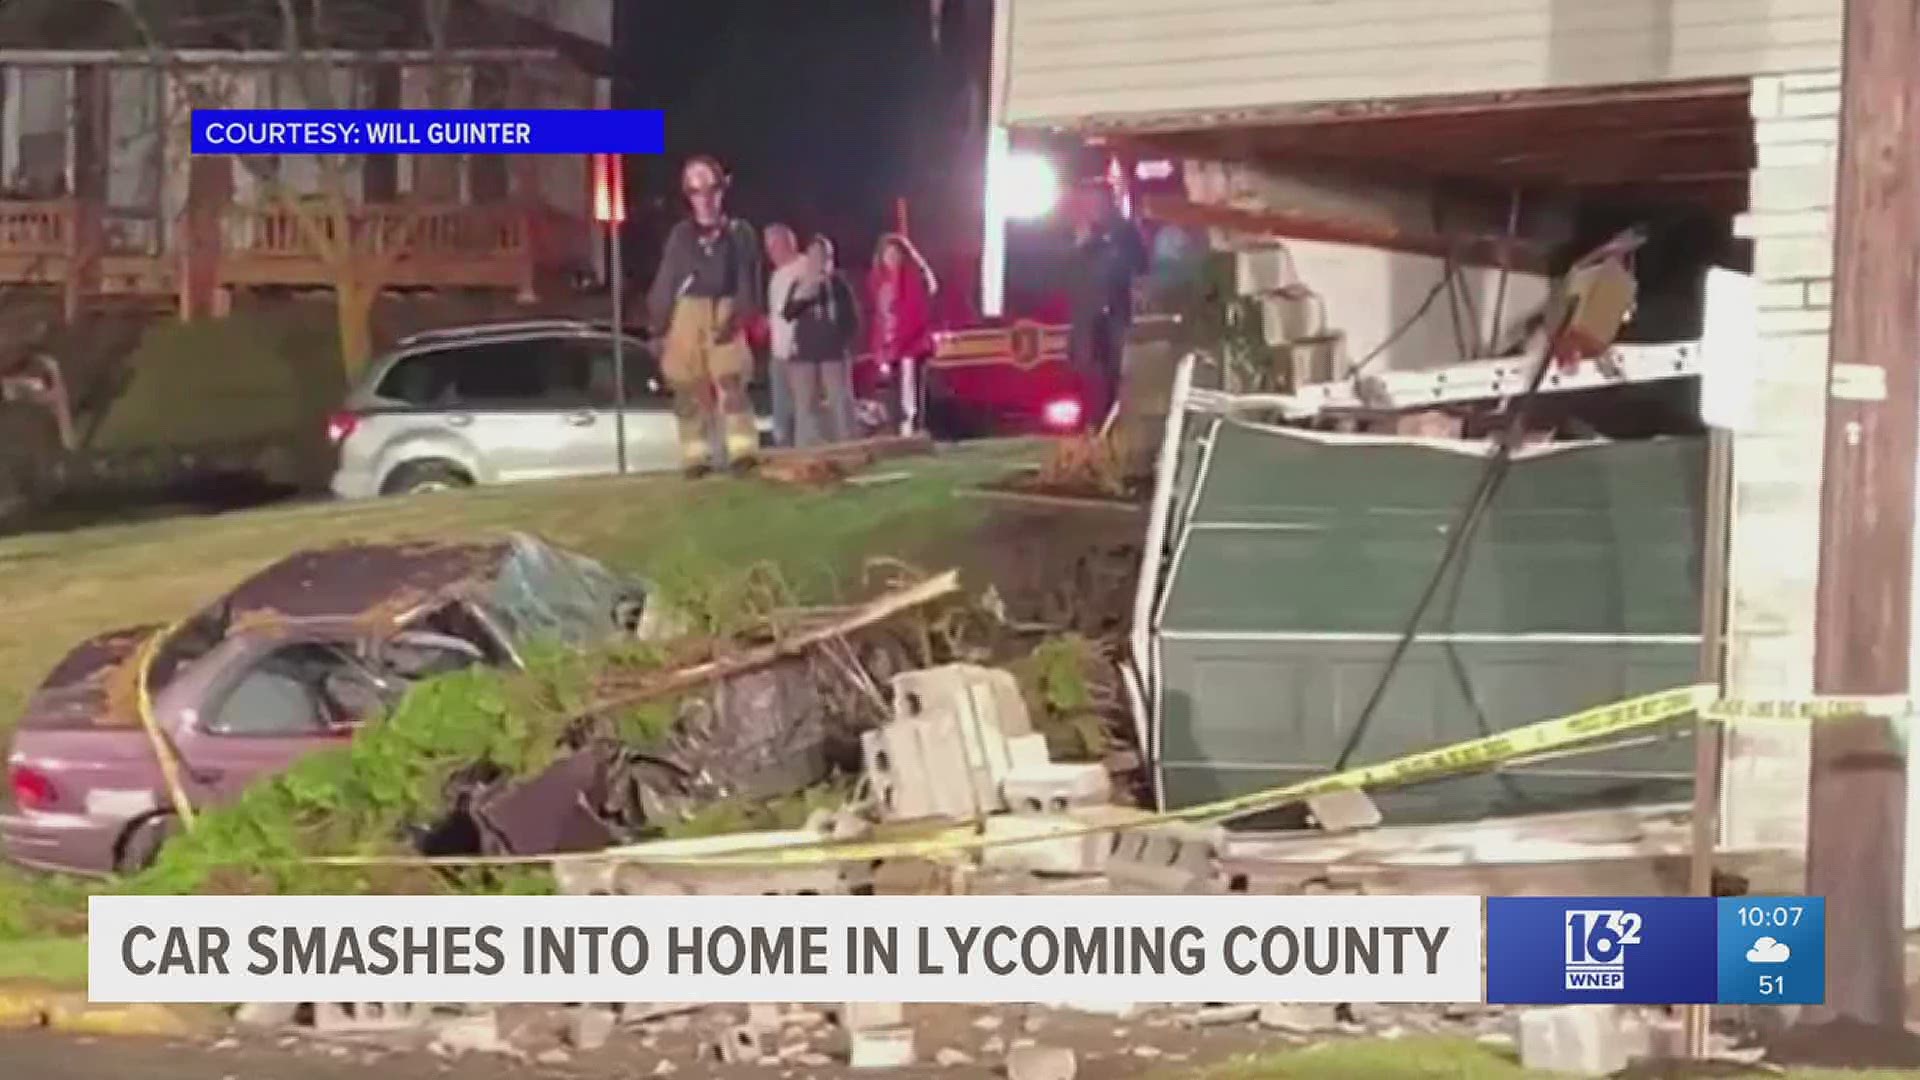 A car crashed into a home in South Williamsport Sunday evening. Officials say one person from the vehicle and one from the home were taken to a local hospital.